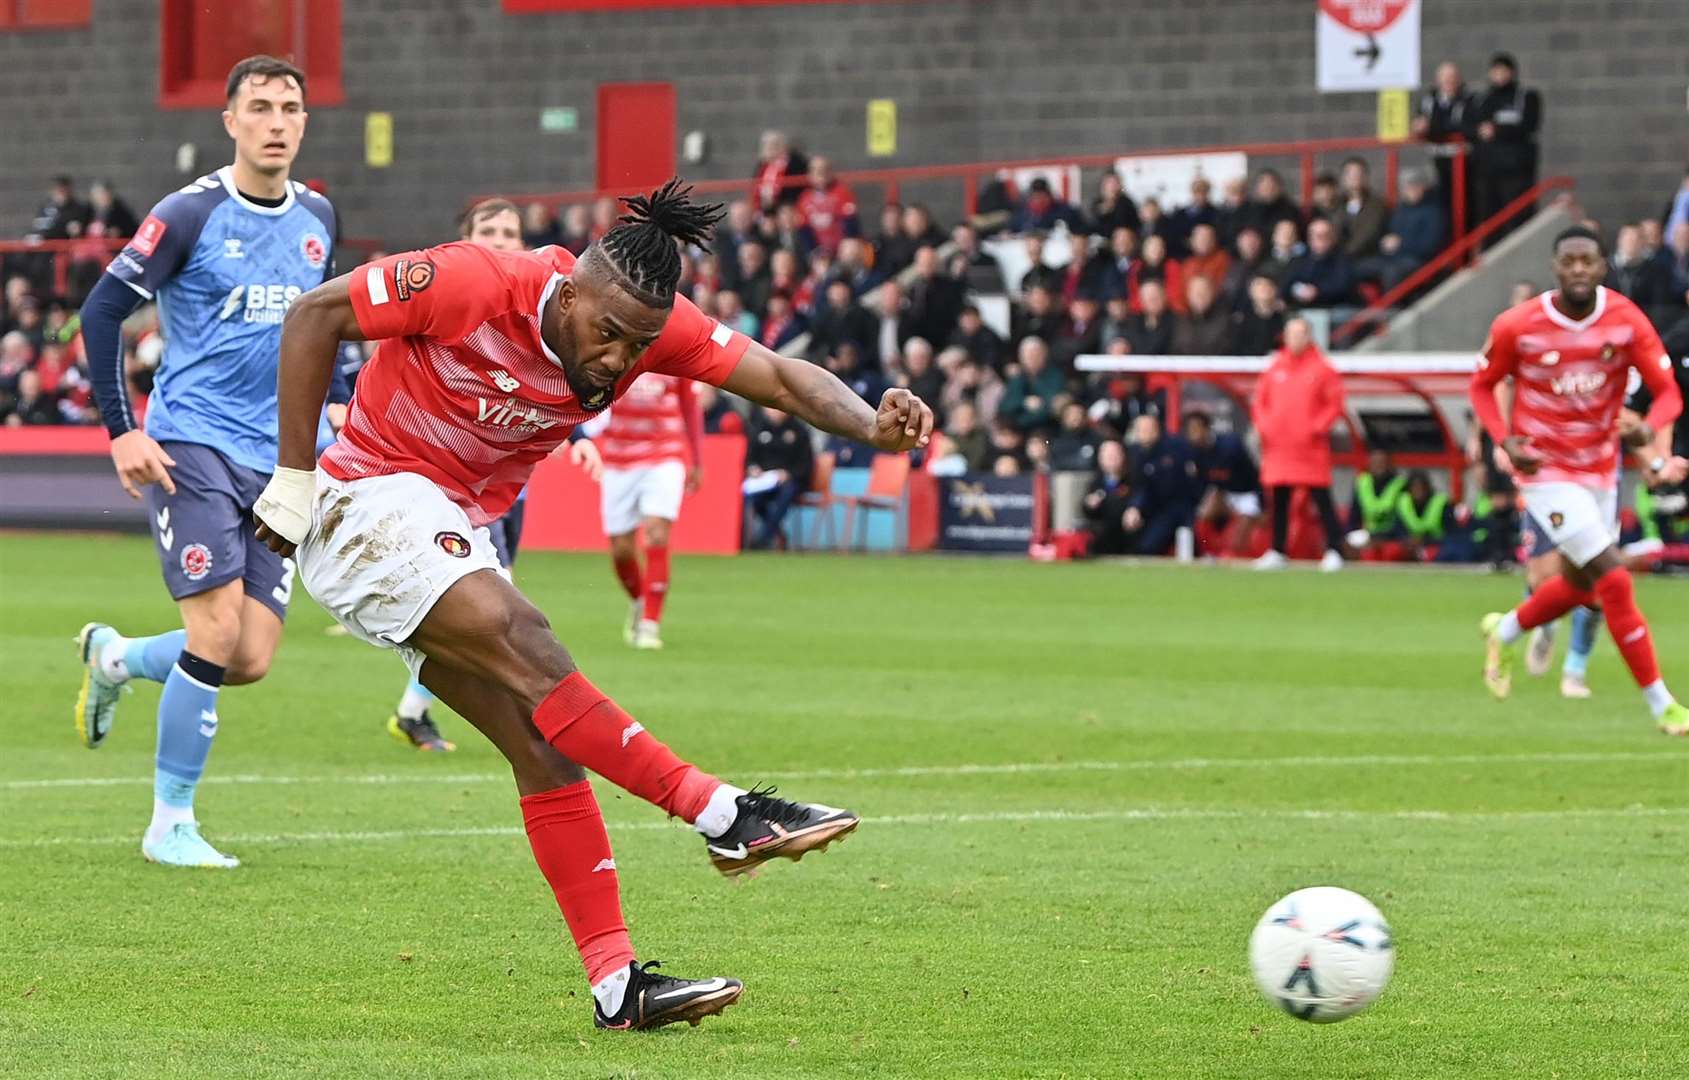 Dominic Poleon goes for goal during Ebbsfleet's FA Cup clash with Fleetwood Town last November. Picture: Keith Gillard